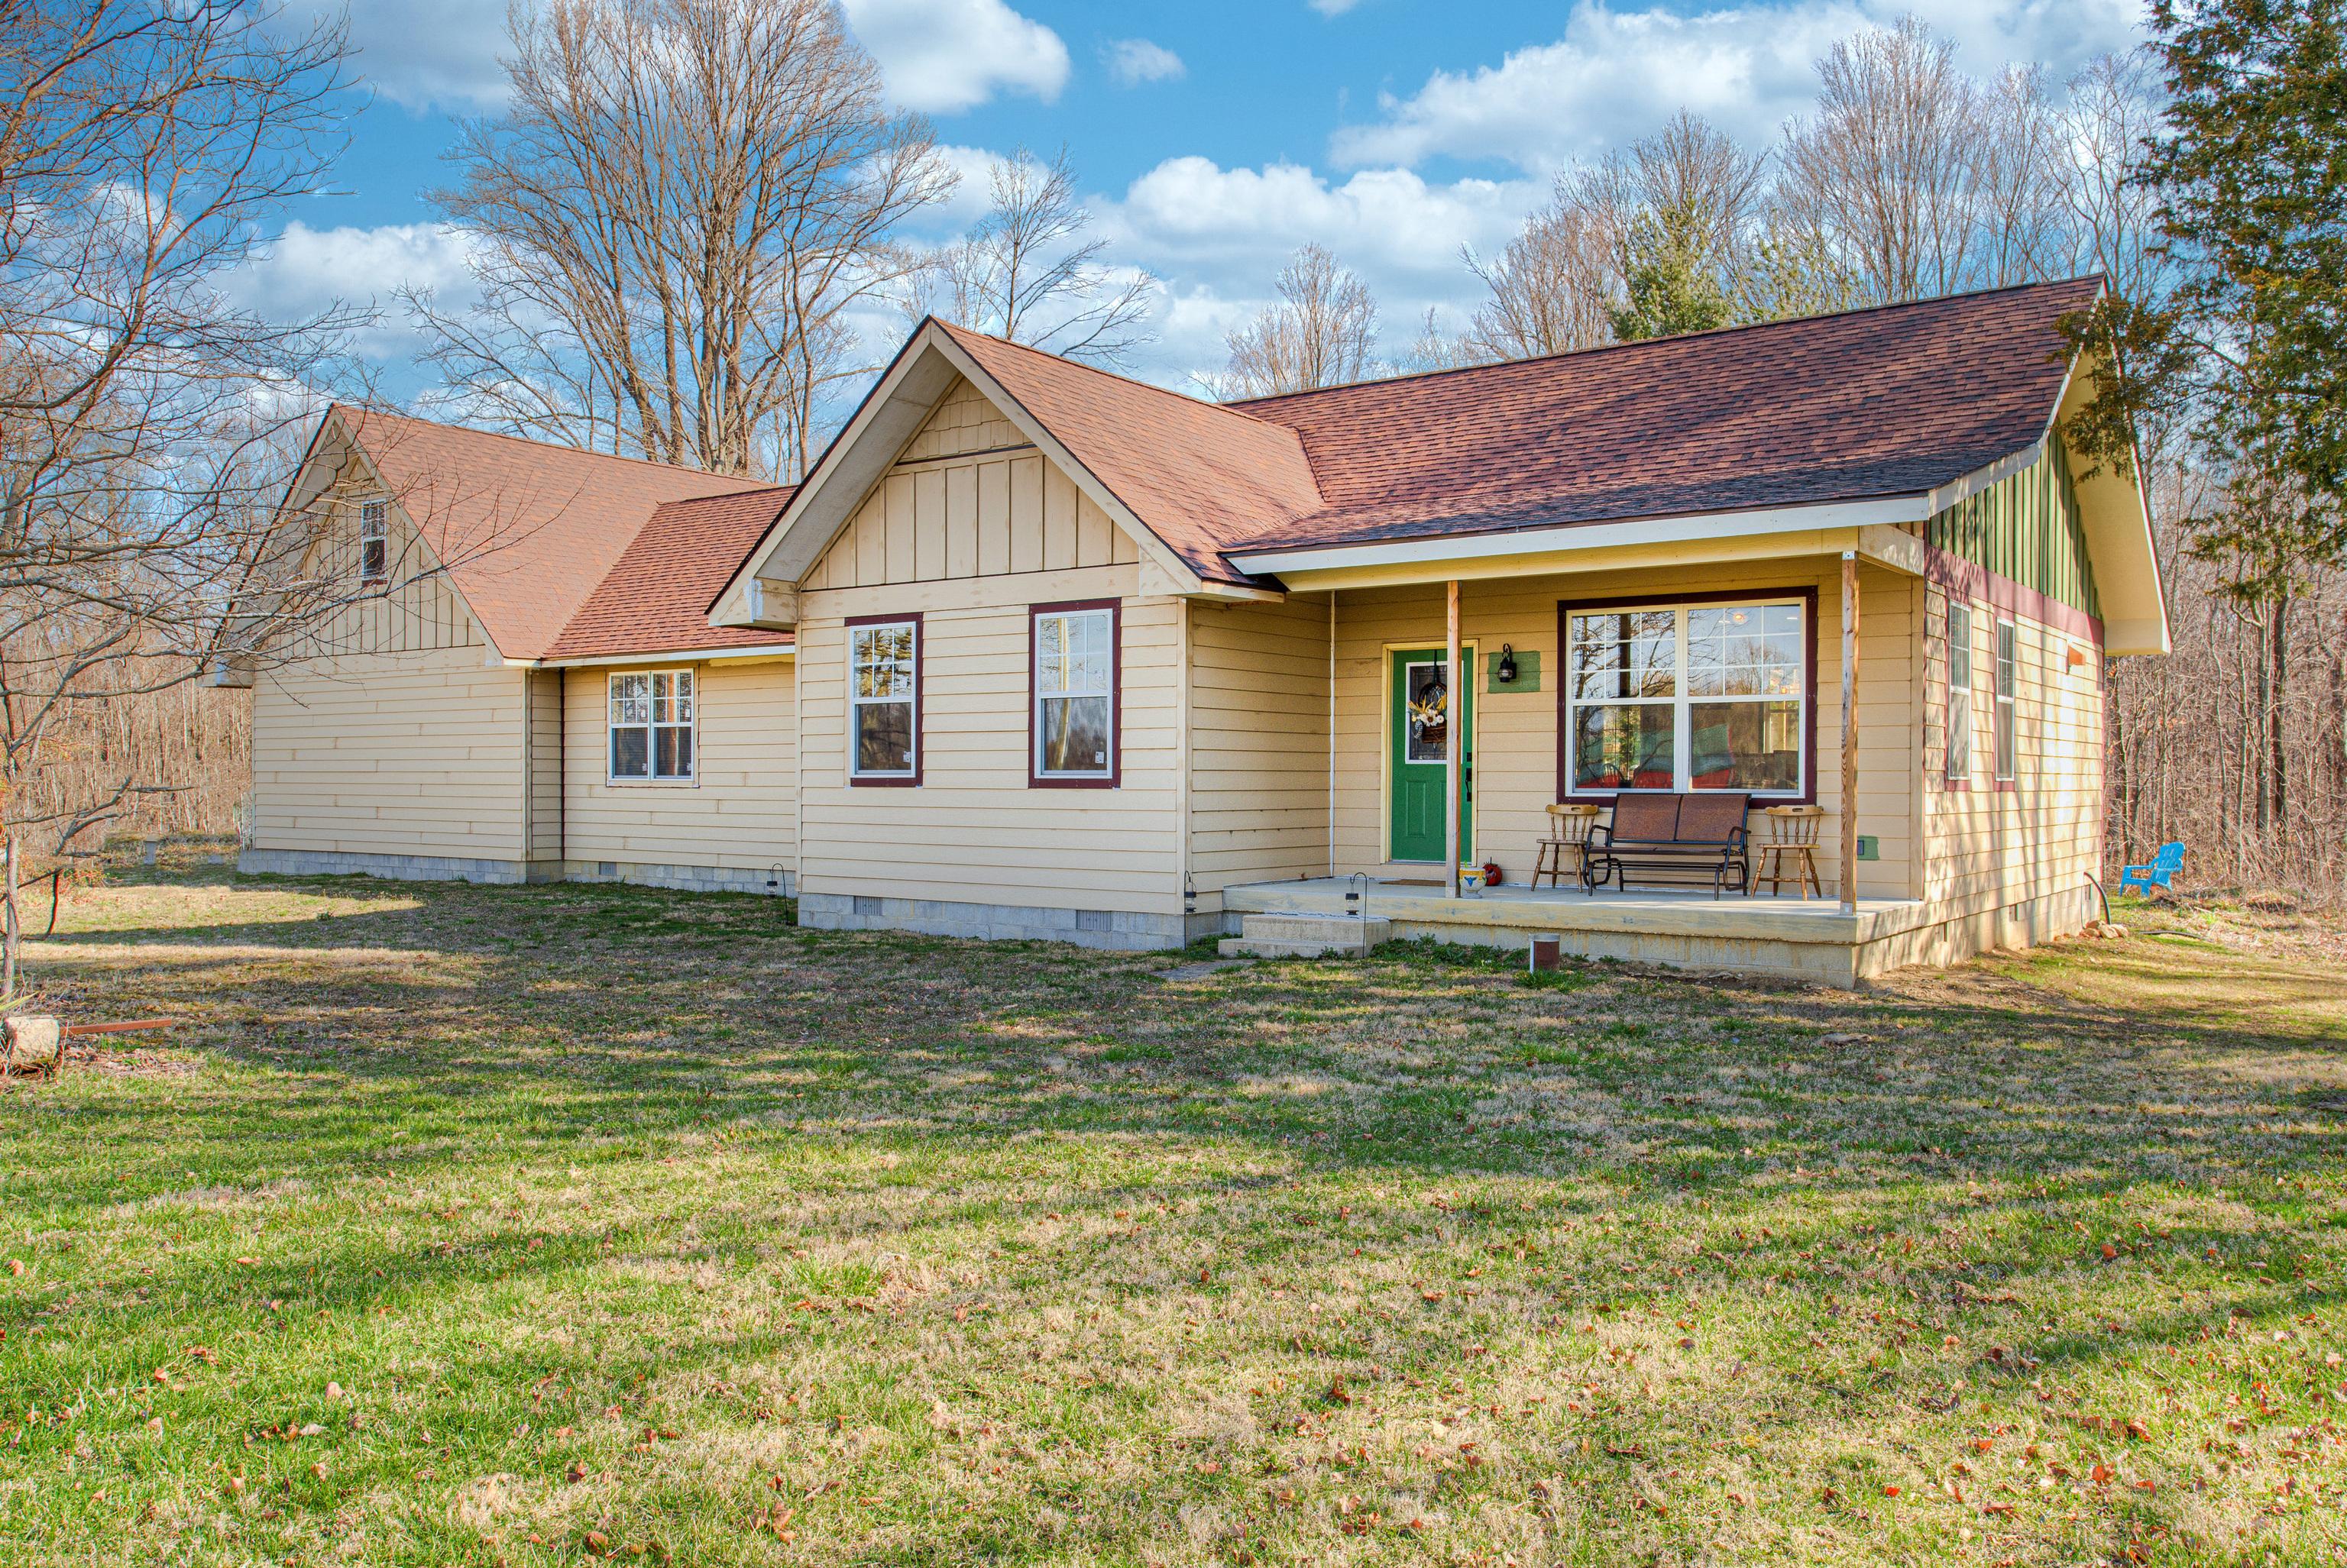 Photo one of 5123 Poff Rd Martinsville IN 46151 | MLS 21968953